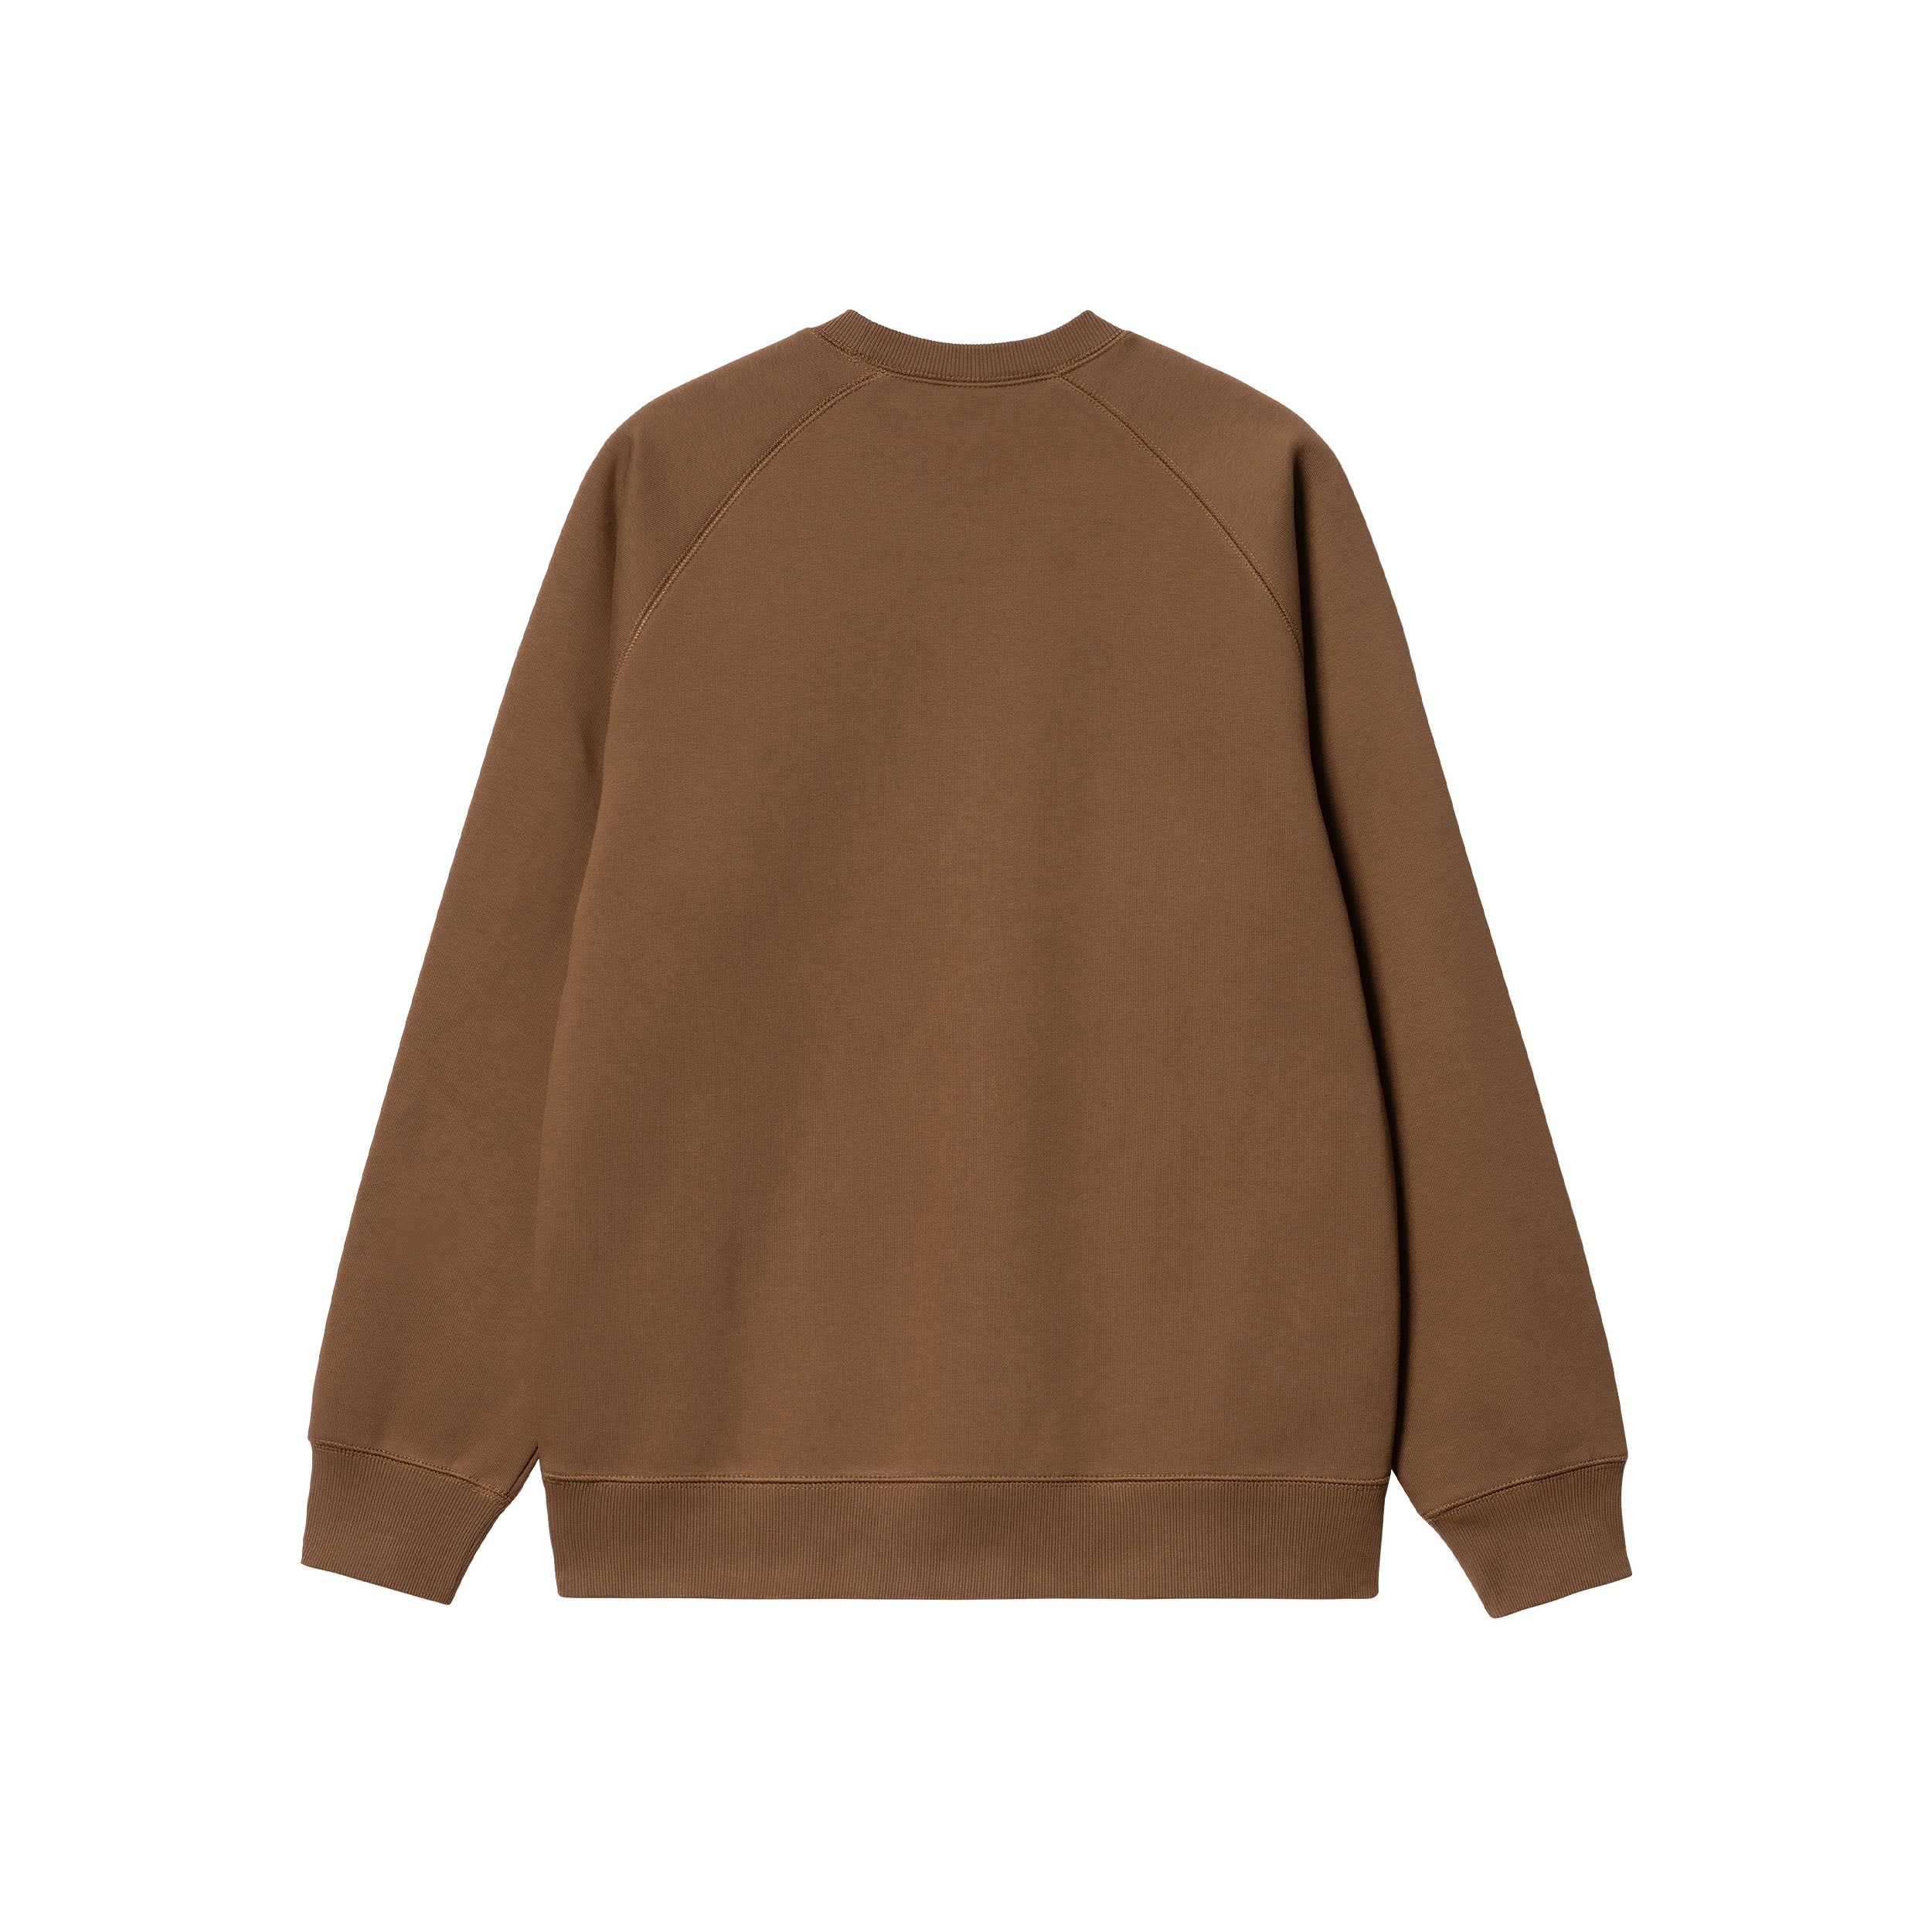 Carhartt WIP Chase Sweat (tamarind/gold) - Blue Mountain Store